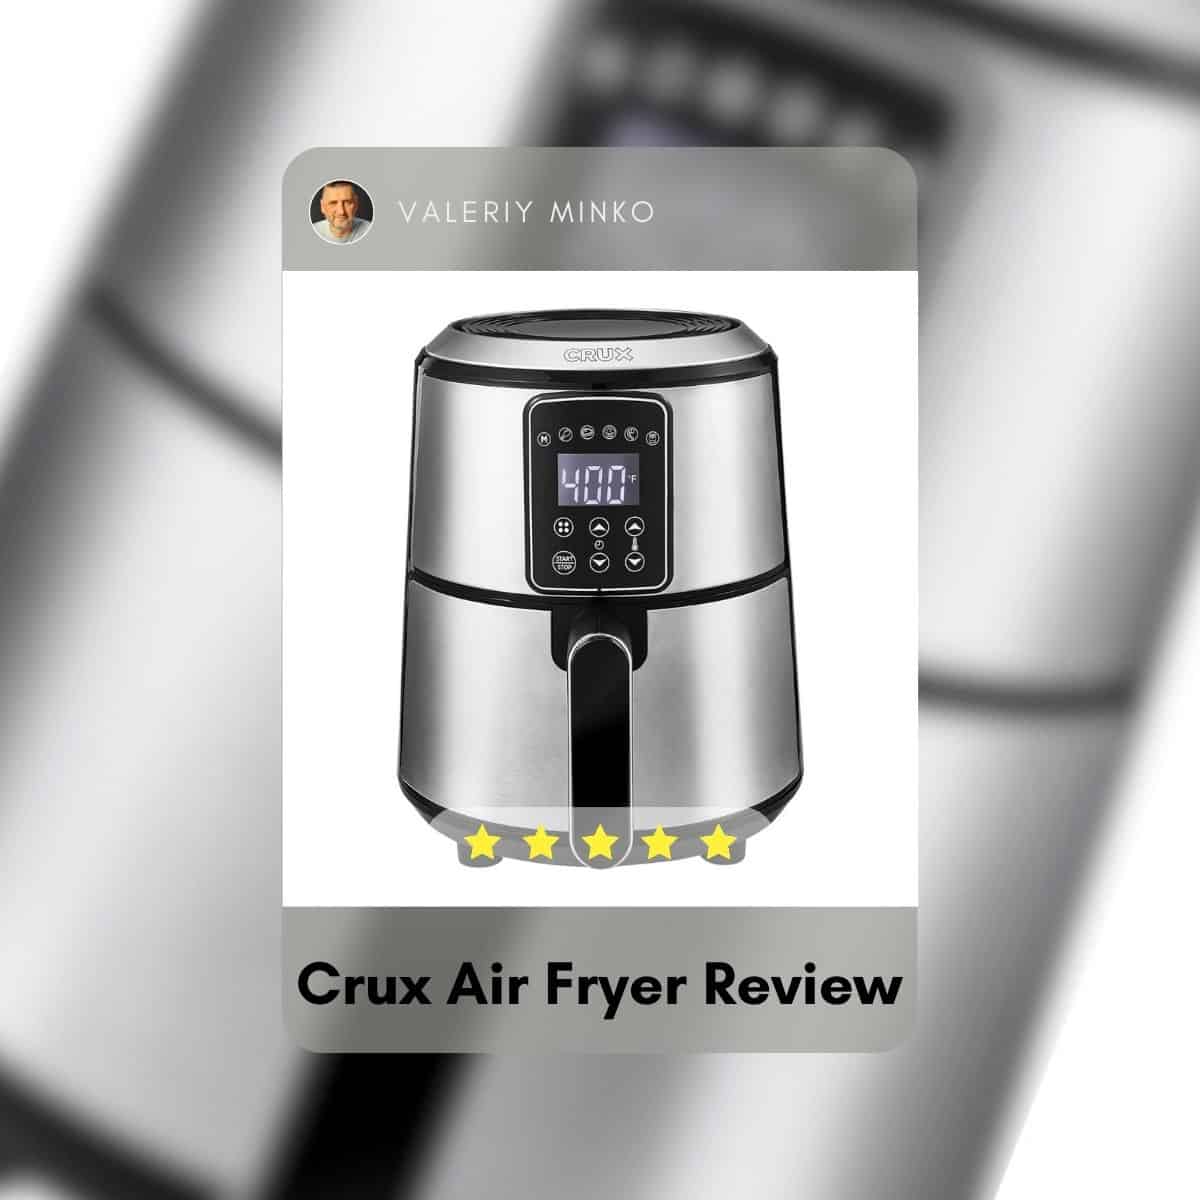 Crux Air Fryer Review - Also The Crumbs Please